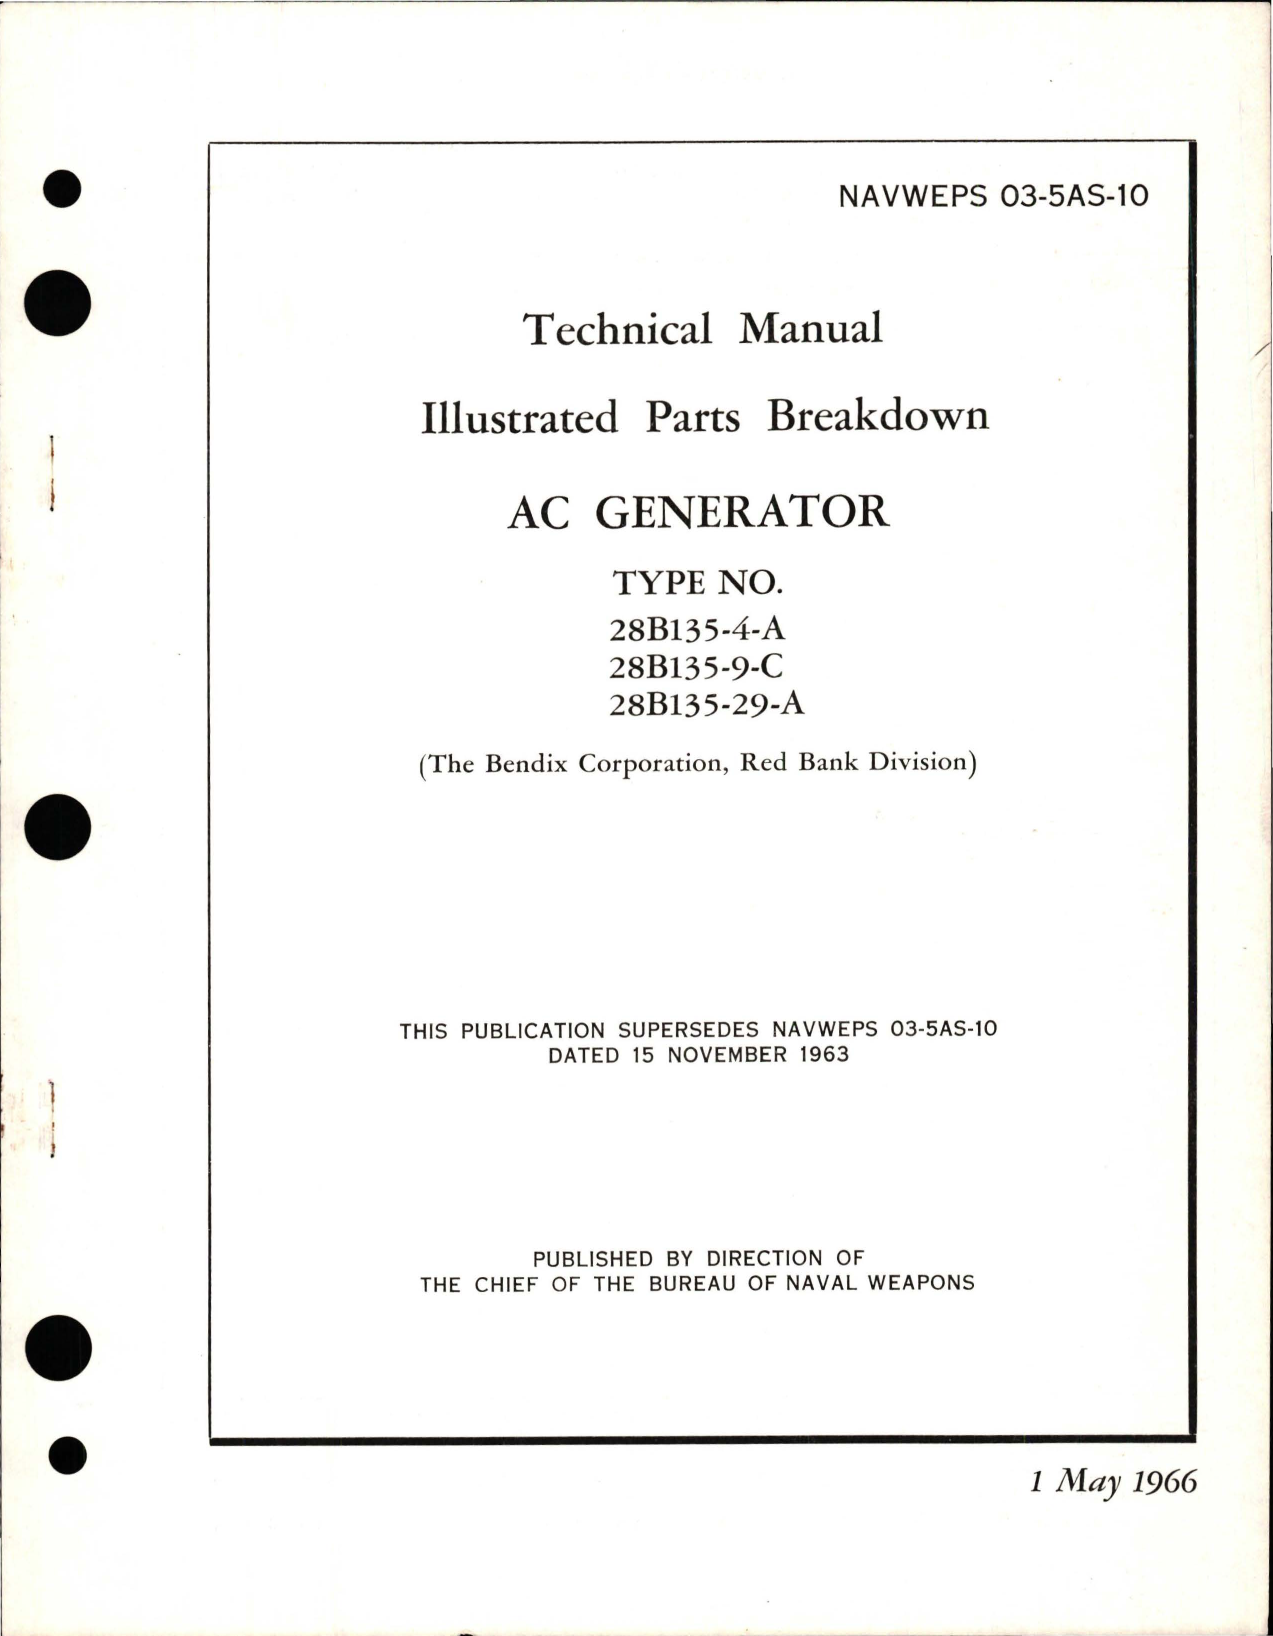 Sample page 1 from AirCorps Library document: Illustrated Parts Breakdown AC Generator - Types 28B135-4-A, 28B135-9-C, and 28B135-29-A 